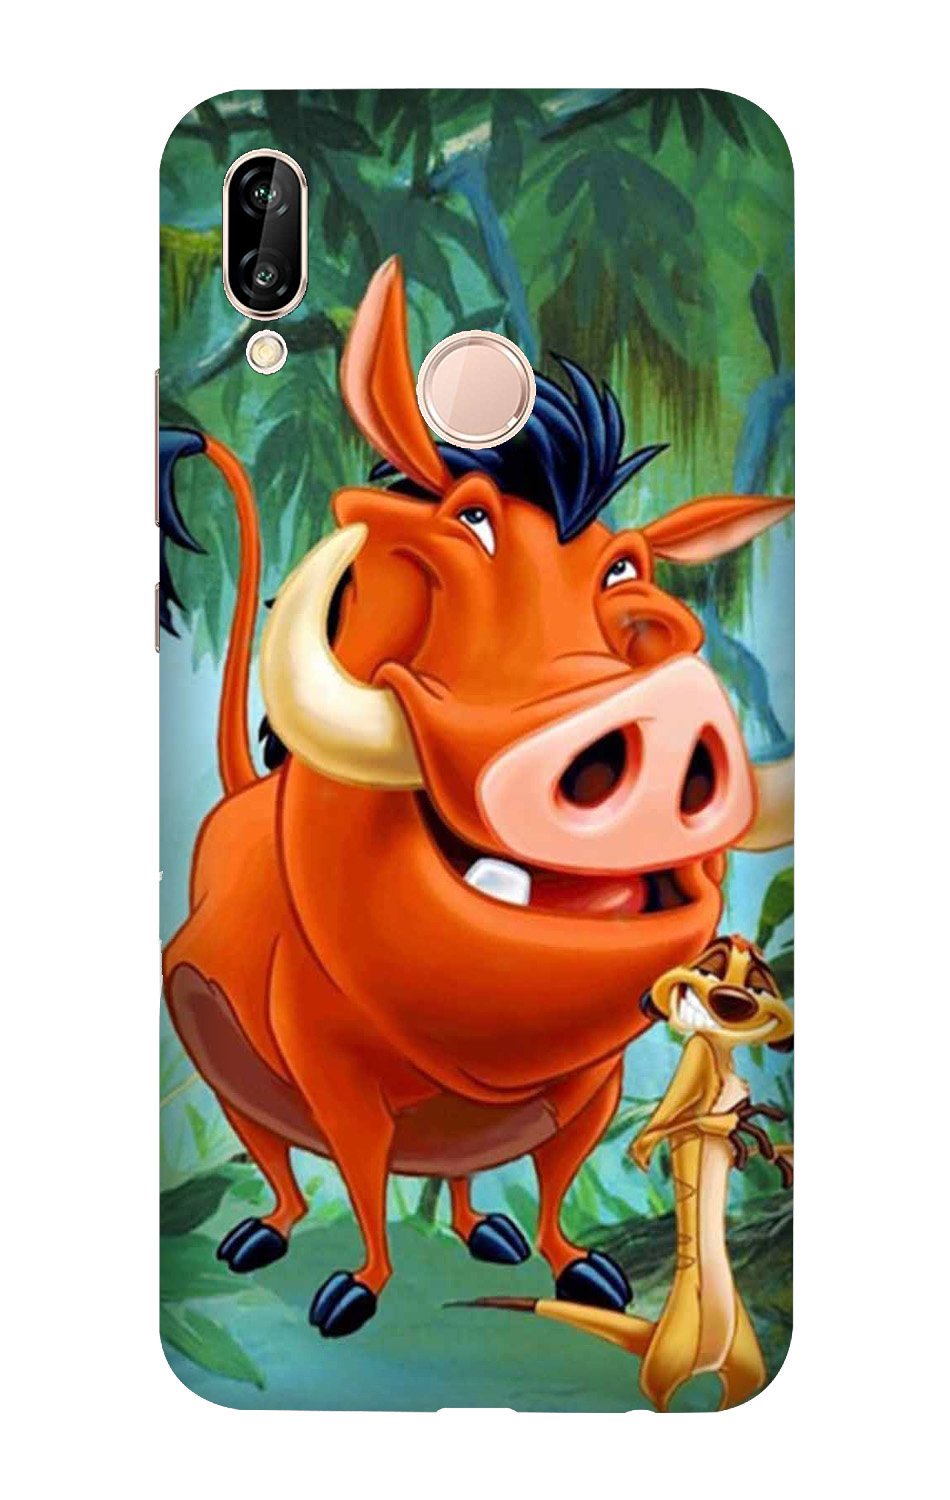 Timon and Pumbaa Mobile Back Case for Vivo Y95/ Y93 (Design - 305)